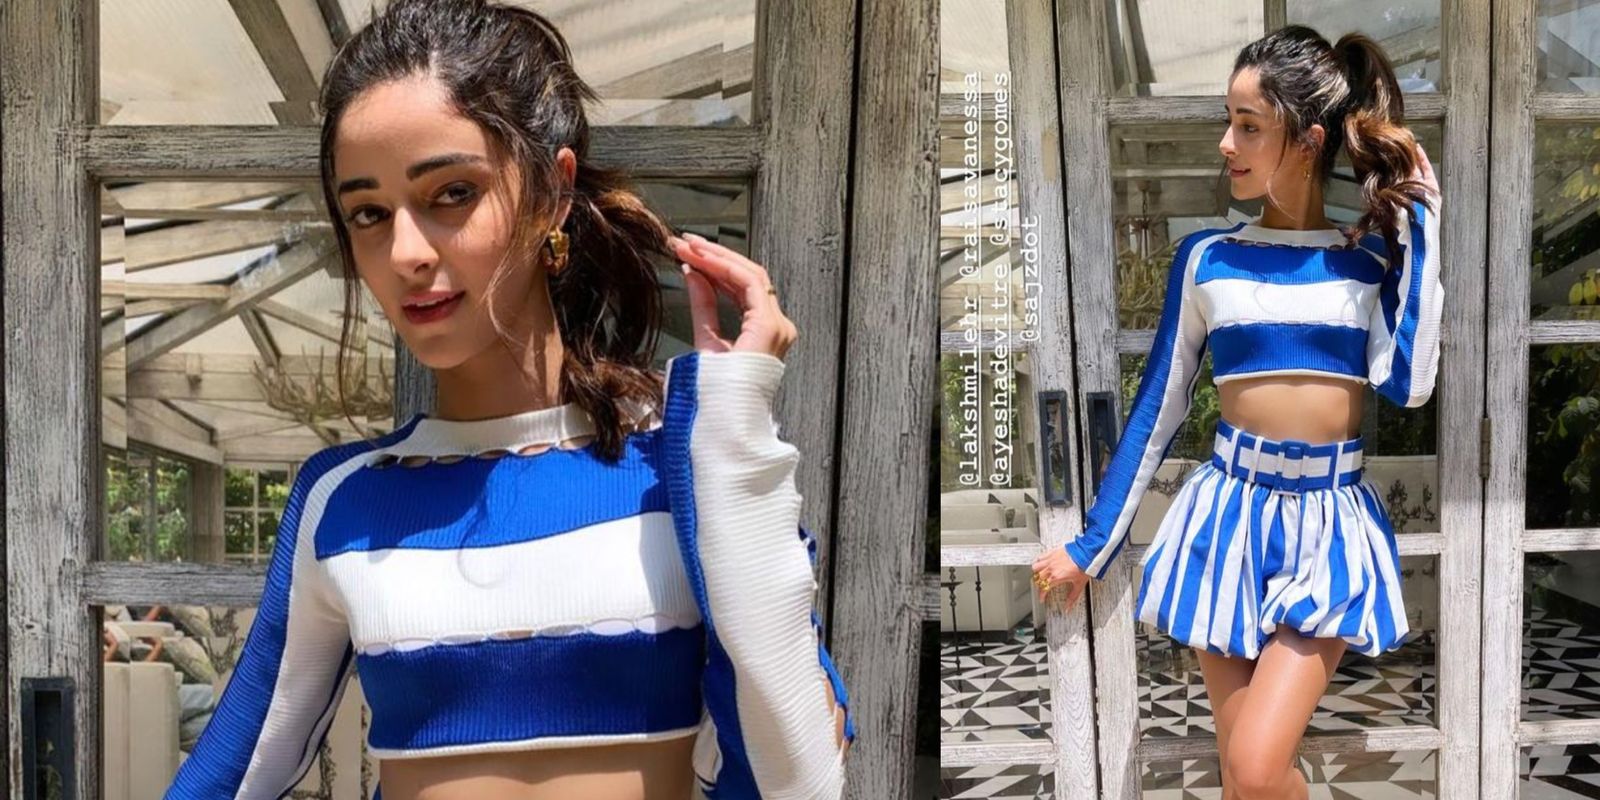 Ananya Panday Is Setting Some Serious Fashion Goals With Her 90s Inspired Outfit